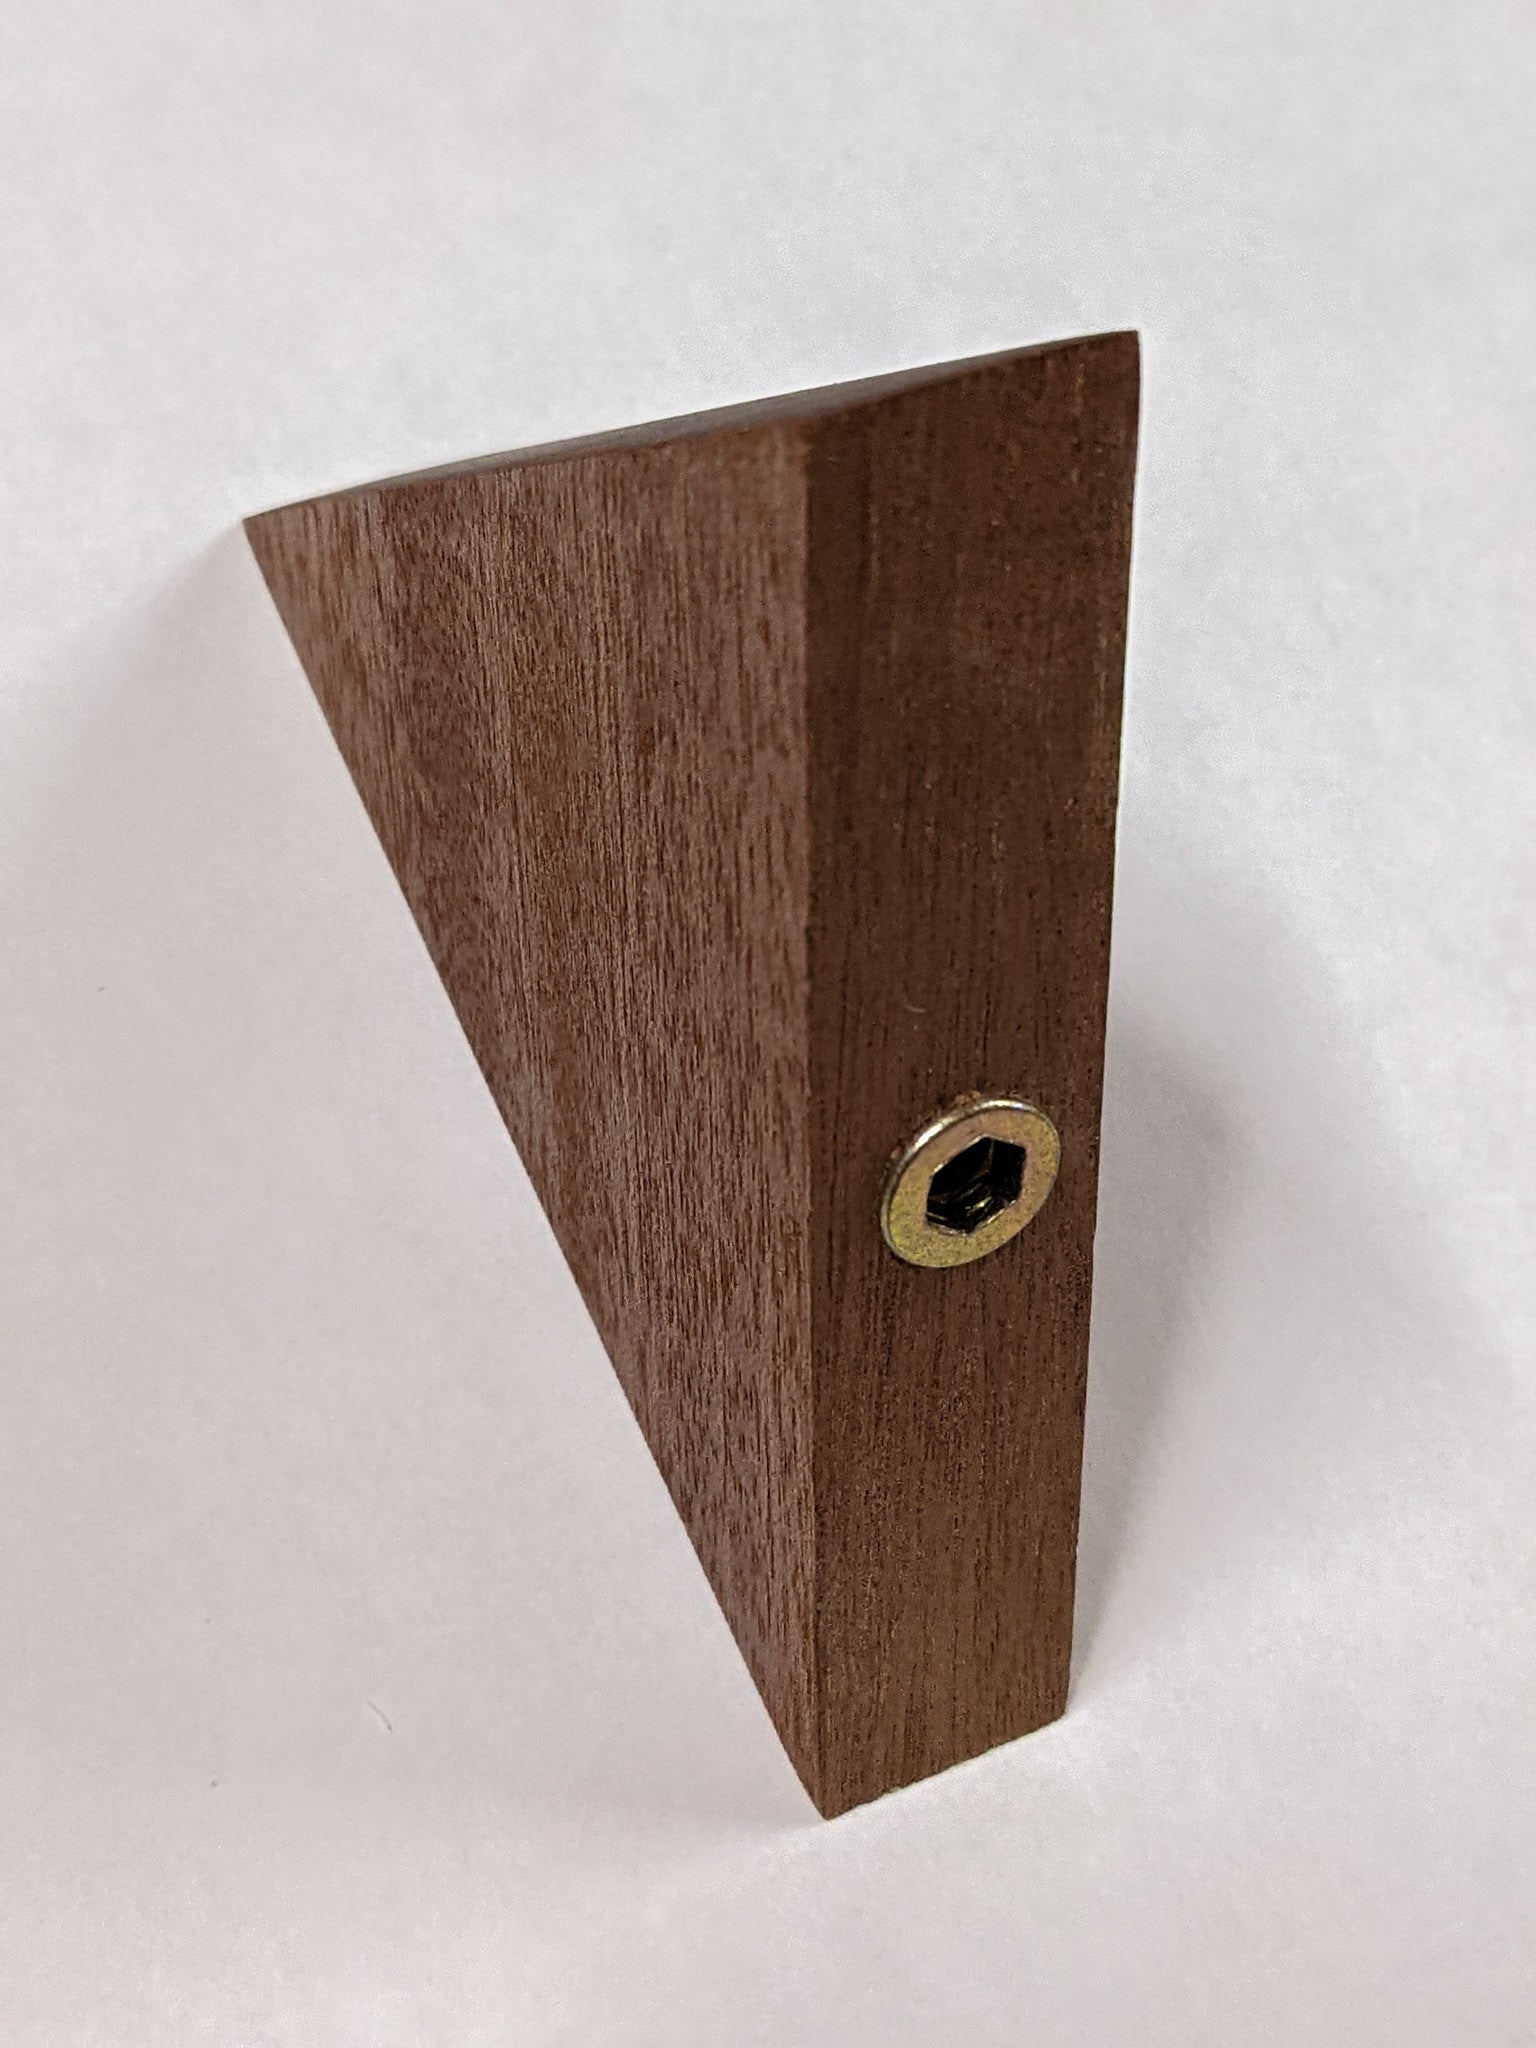 A small triangle floating shelf with back exposed revealing where the hole the screw is screwed into.